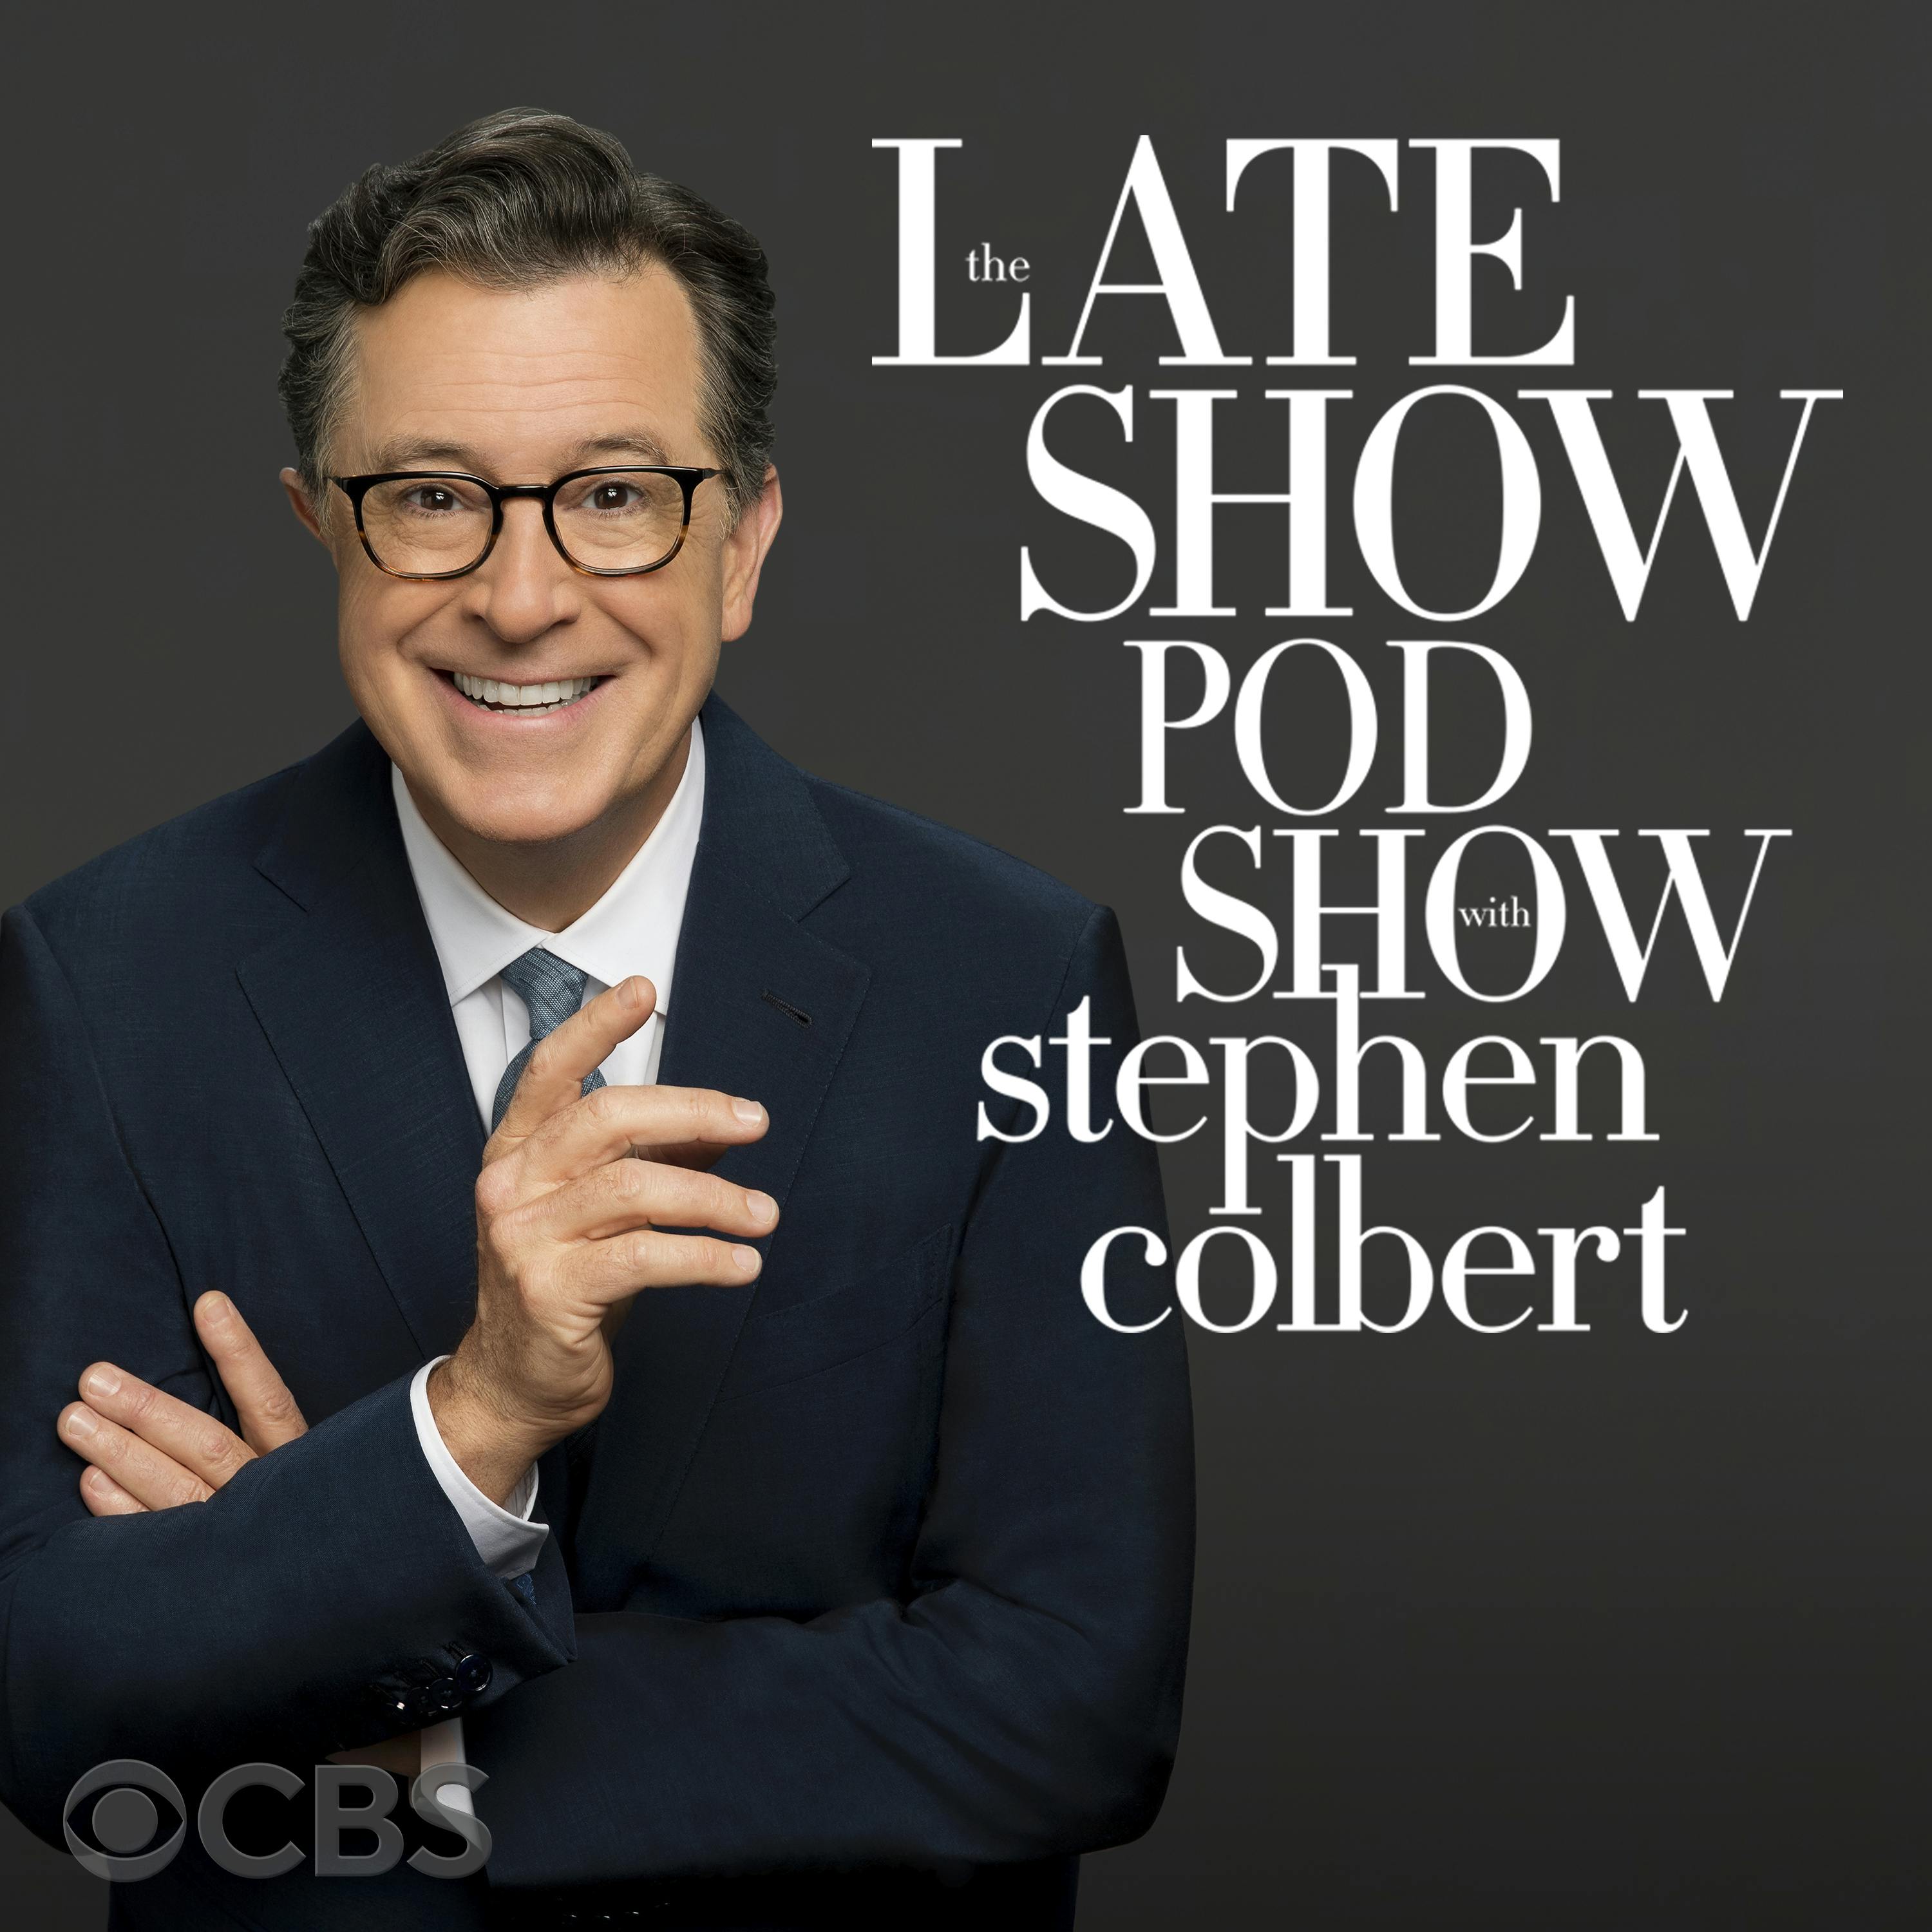 The Late Show Pod Show with Stephen Colbert podcast show image